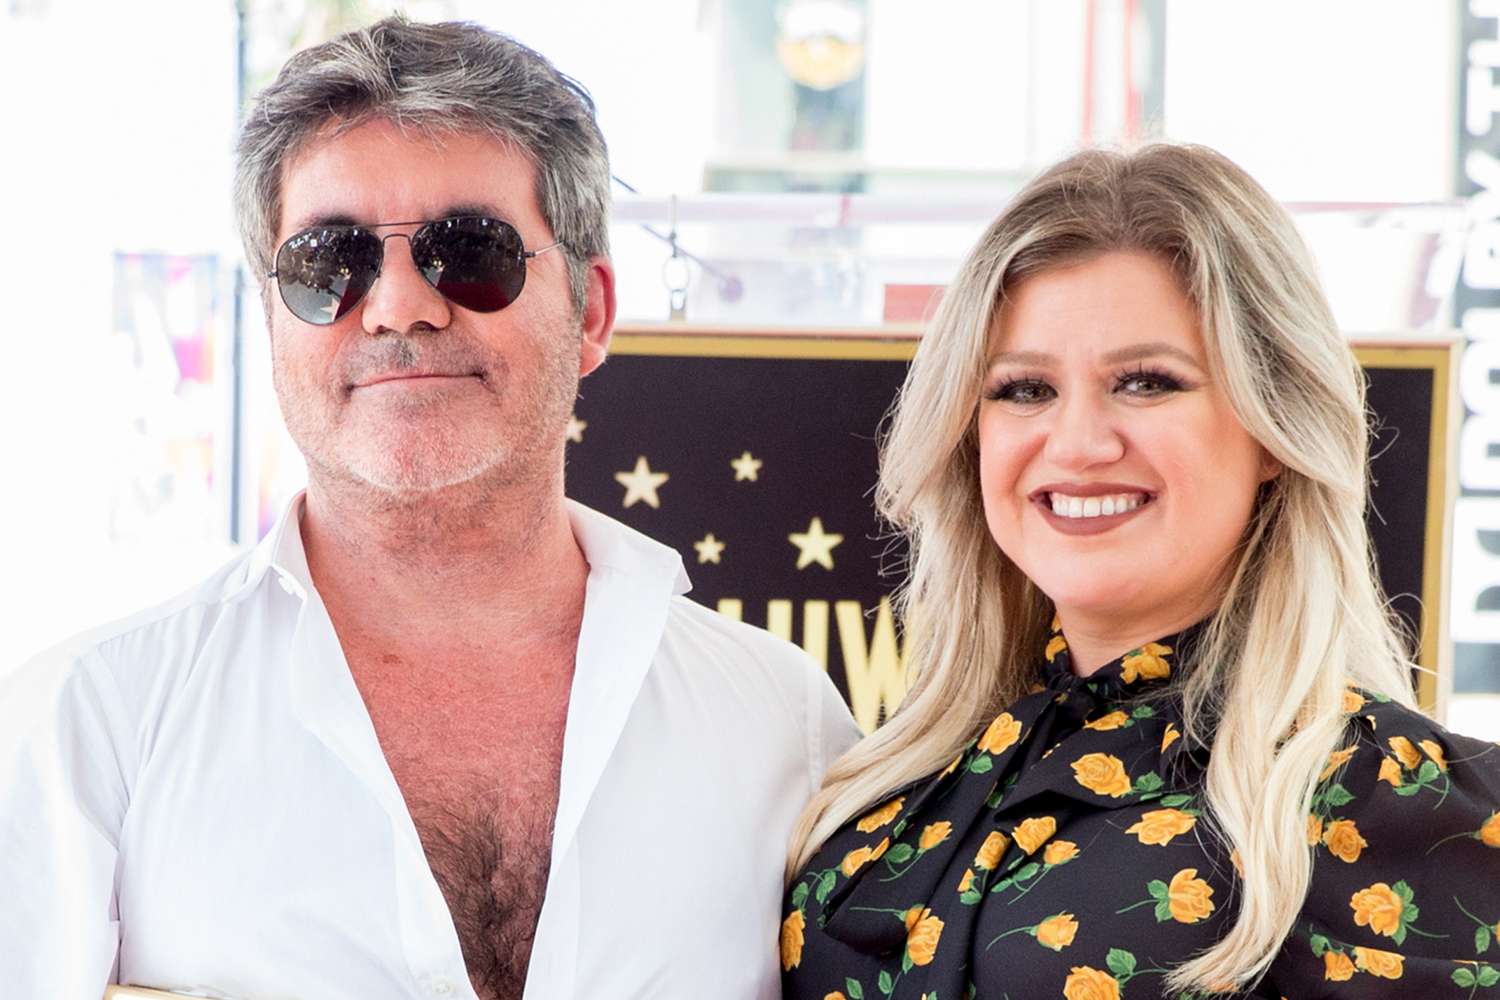 Kelly Clarkson to fill in for Simon Cowell on America's Got Talent after judge breaks back